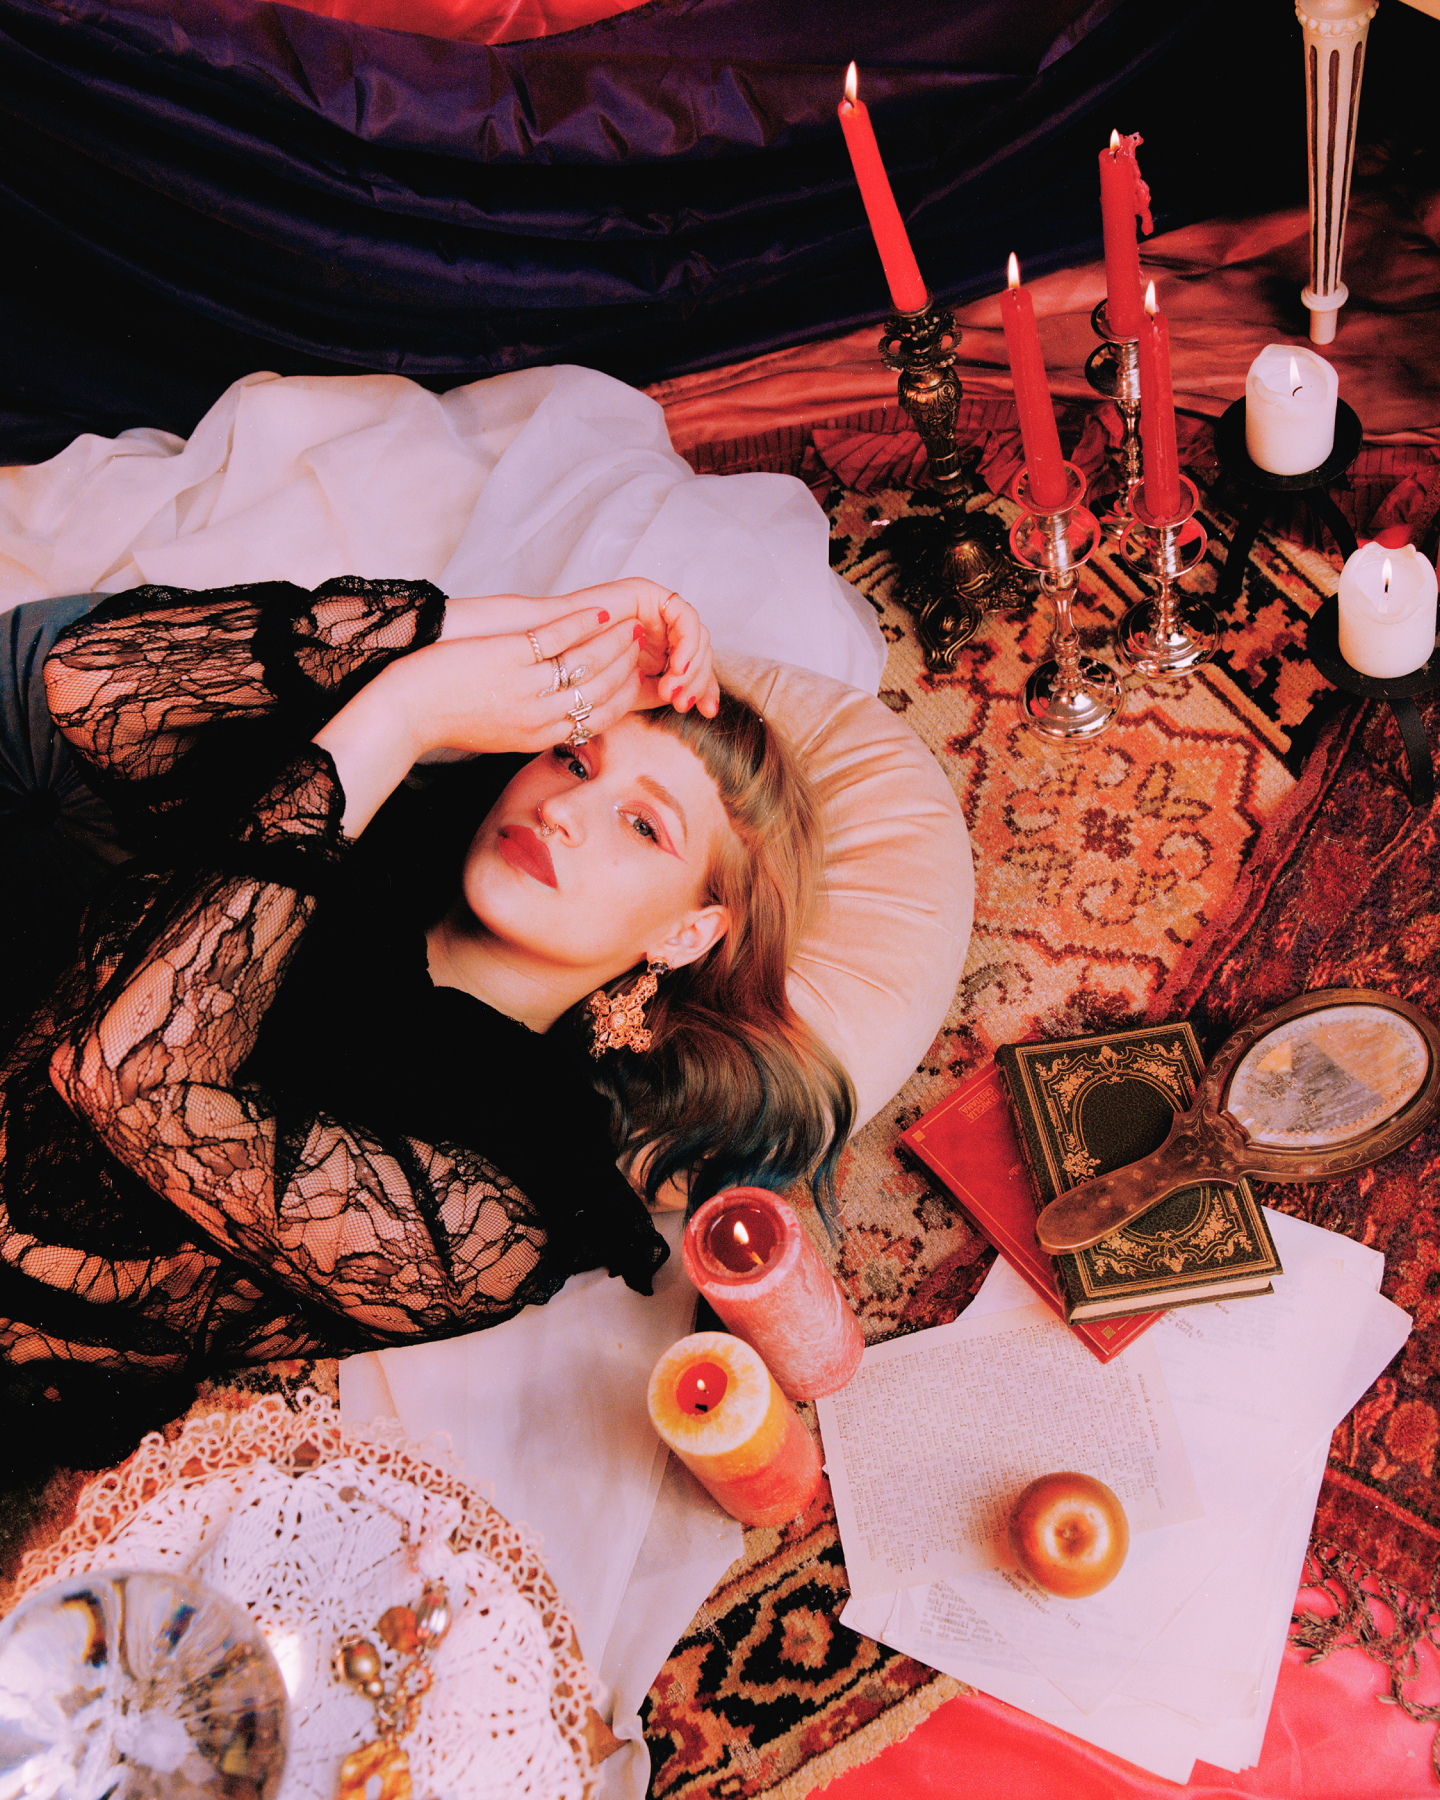 Artist Aiko lying on a carpet surrounded by candles